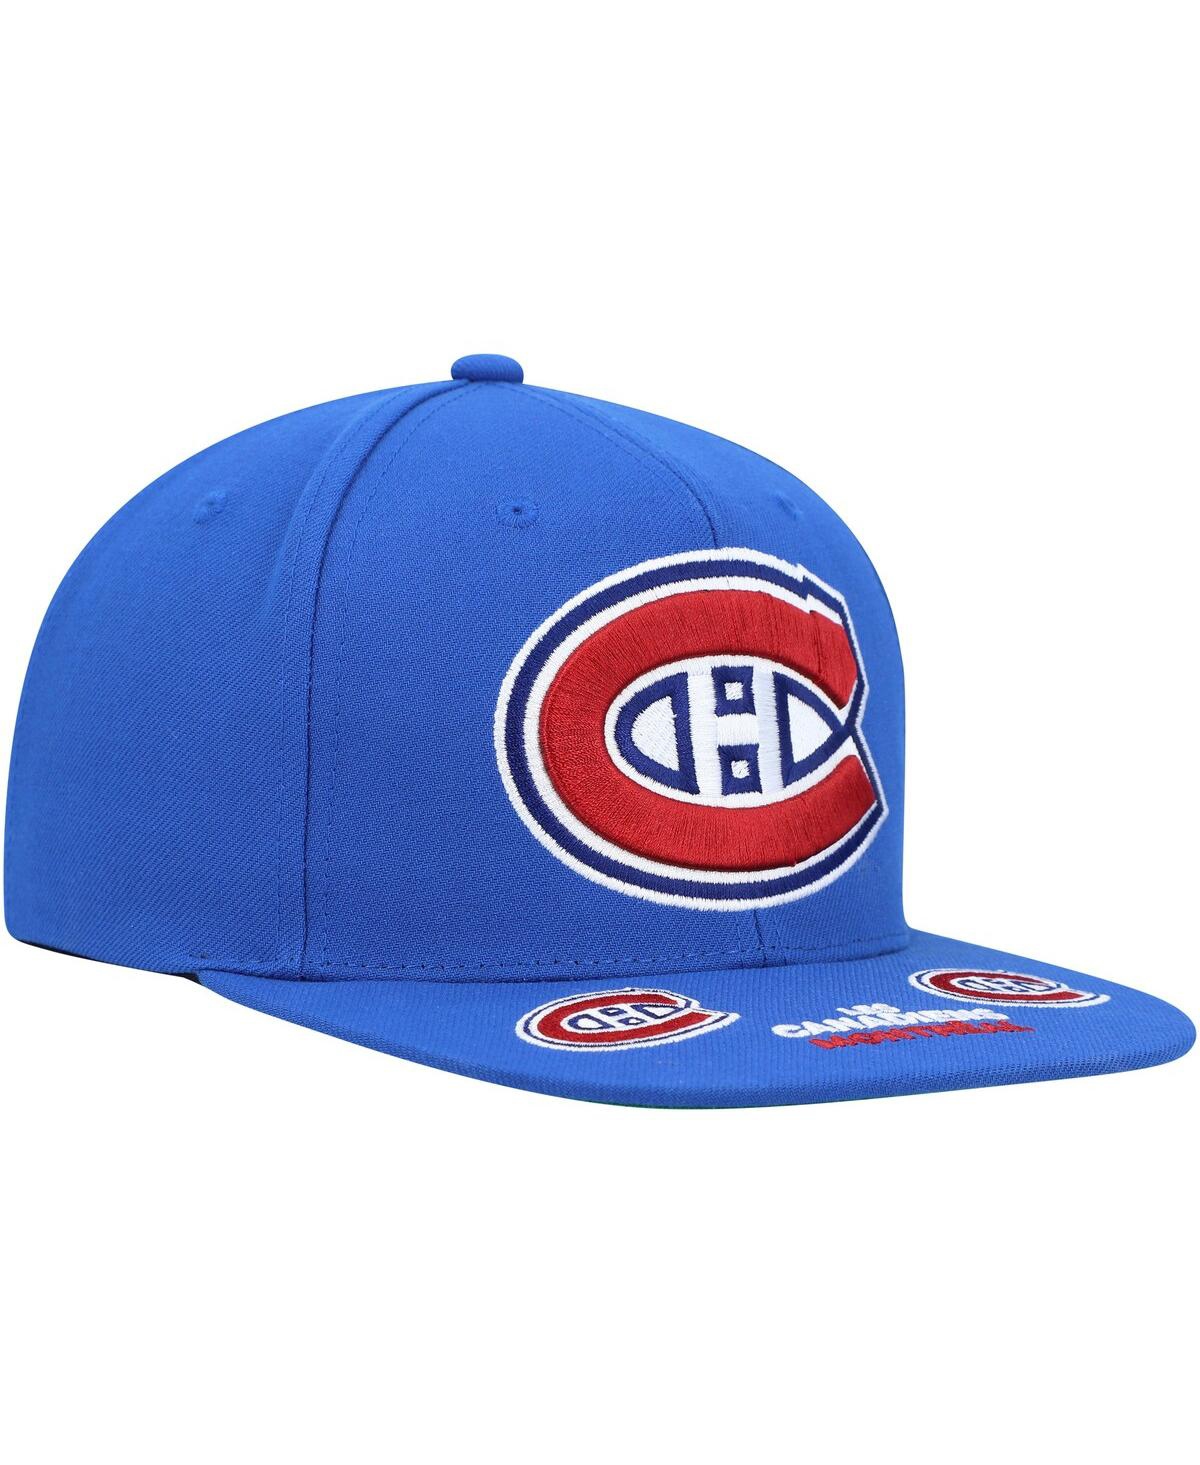 Shop Mitchell & Ness Men's  Blue Montreal Canadiens Vintage-like Hat Trick Snapback Hat